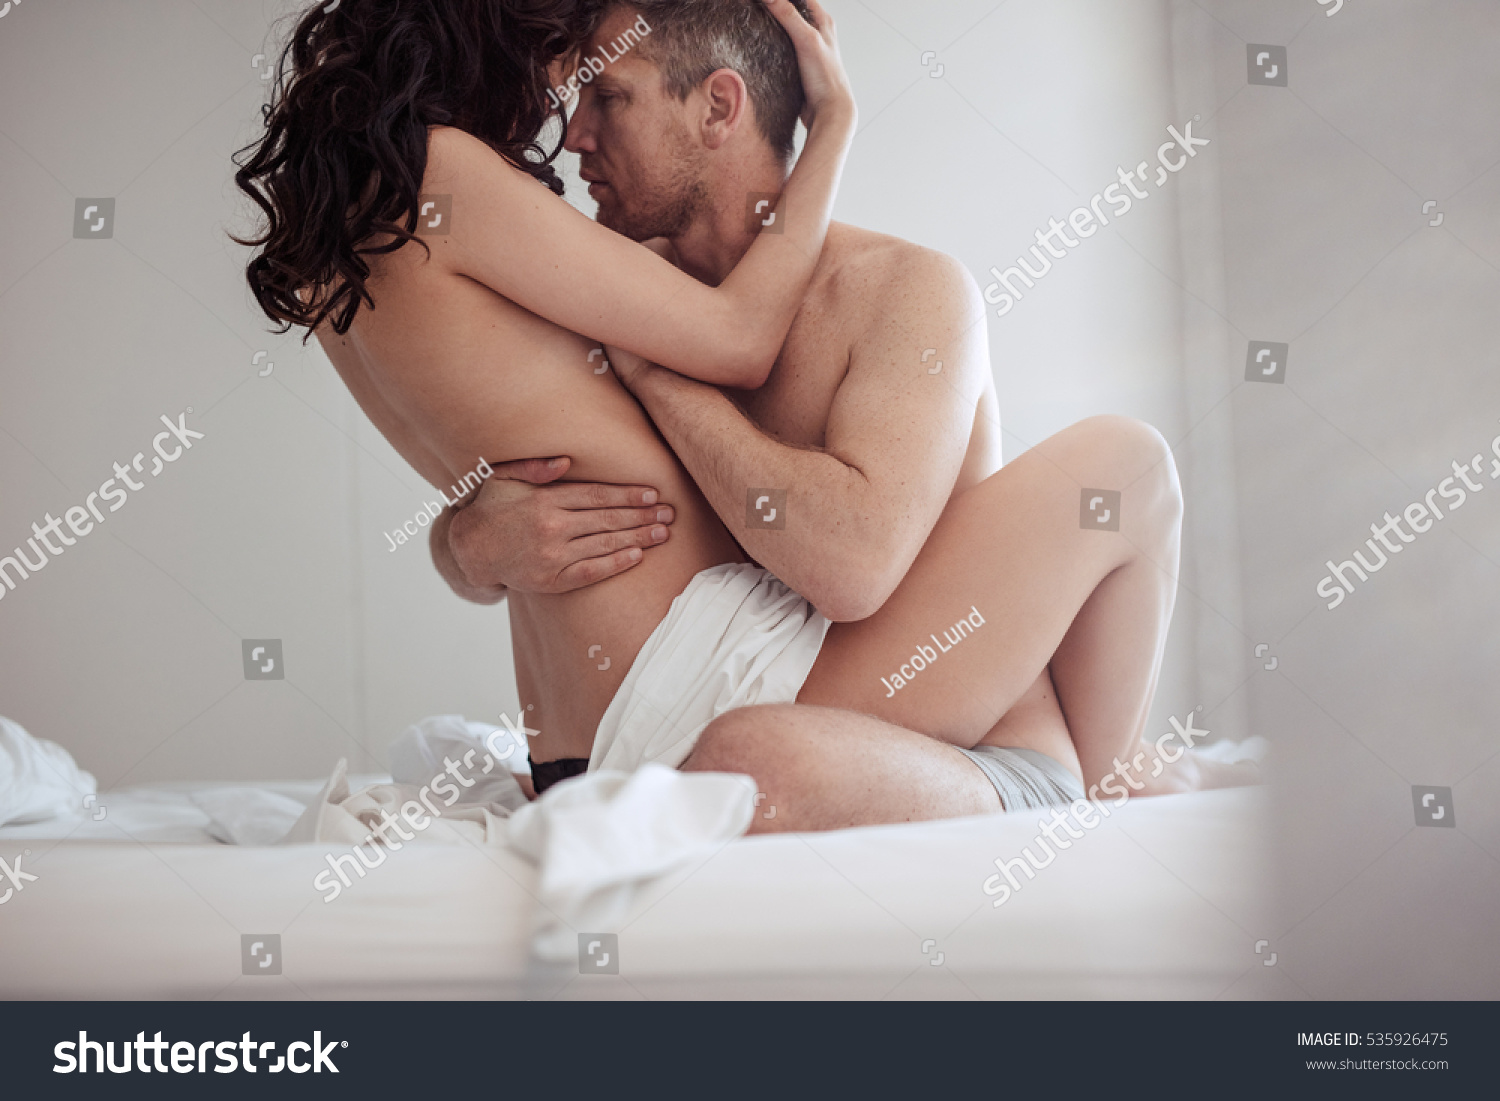 Pictures Of Couple Having Sex 78